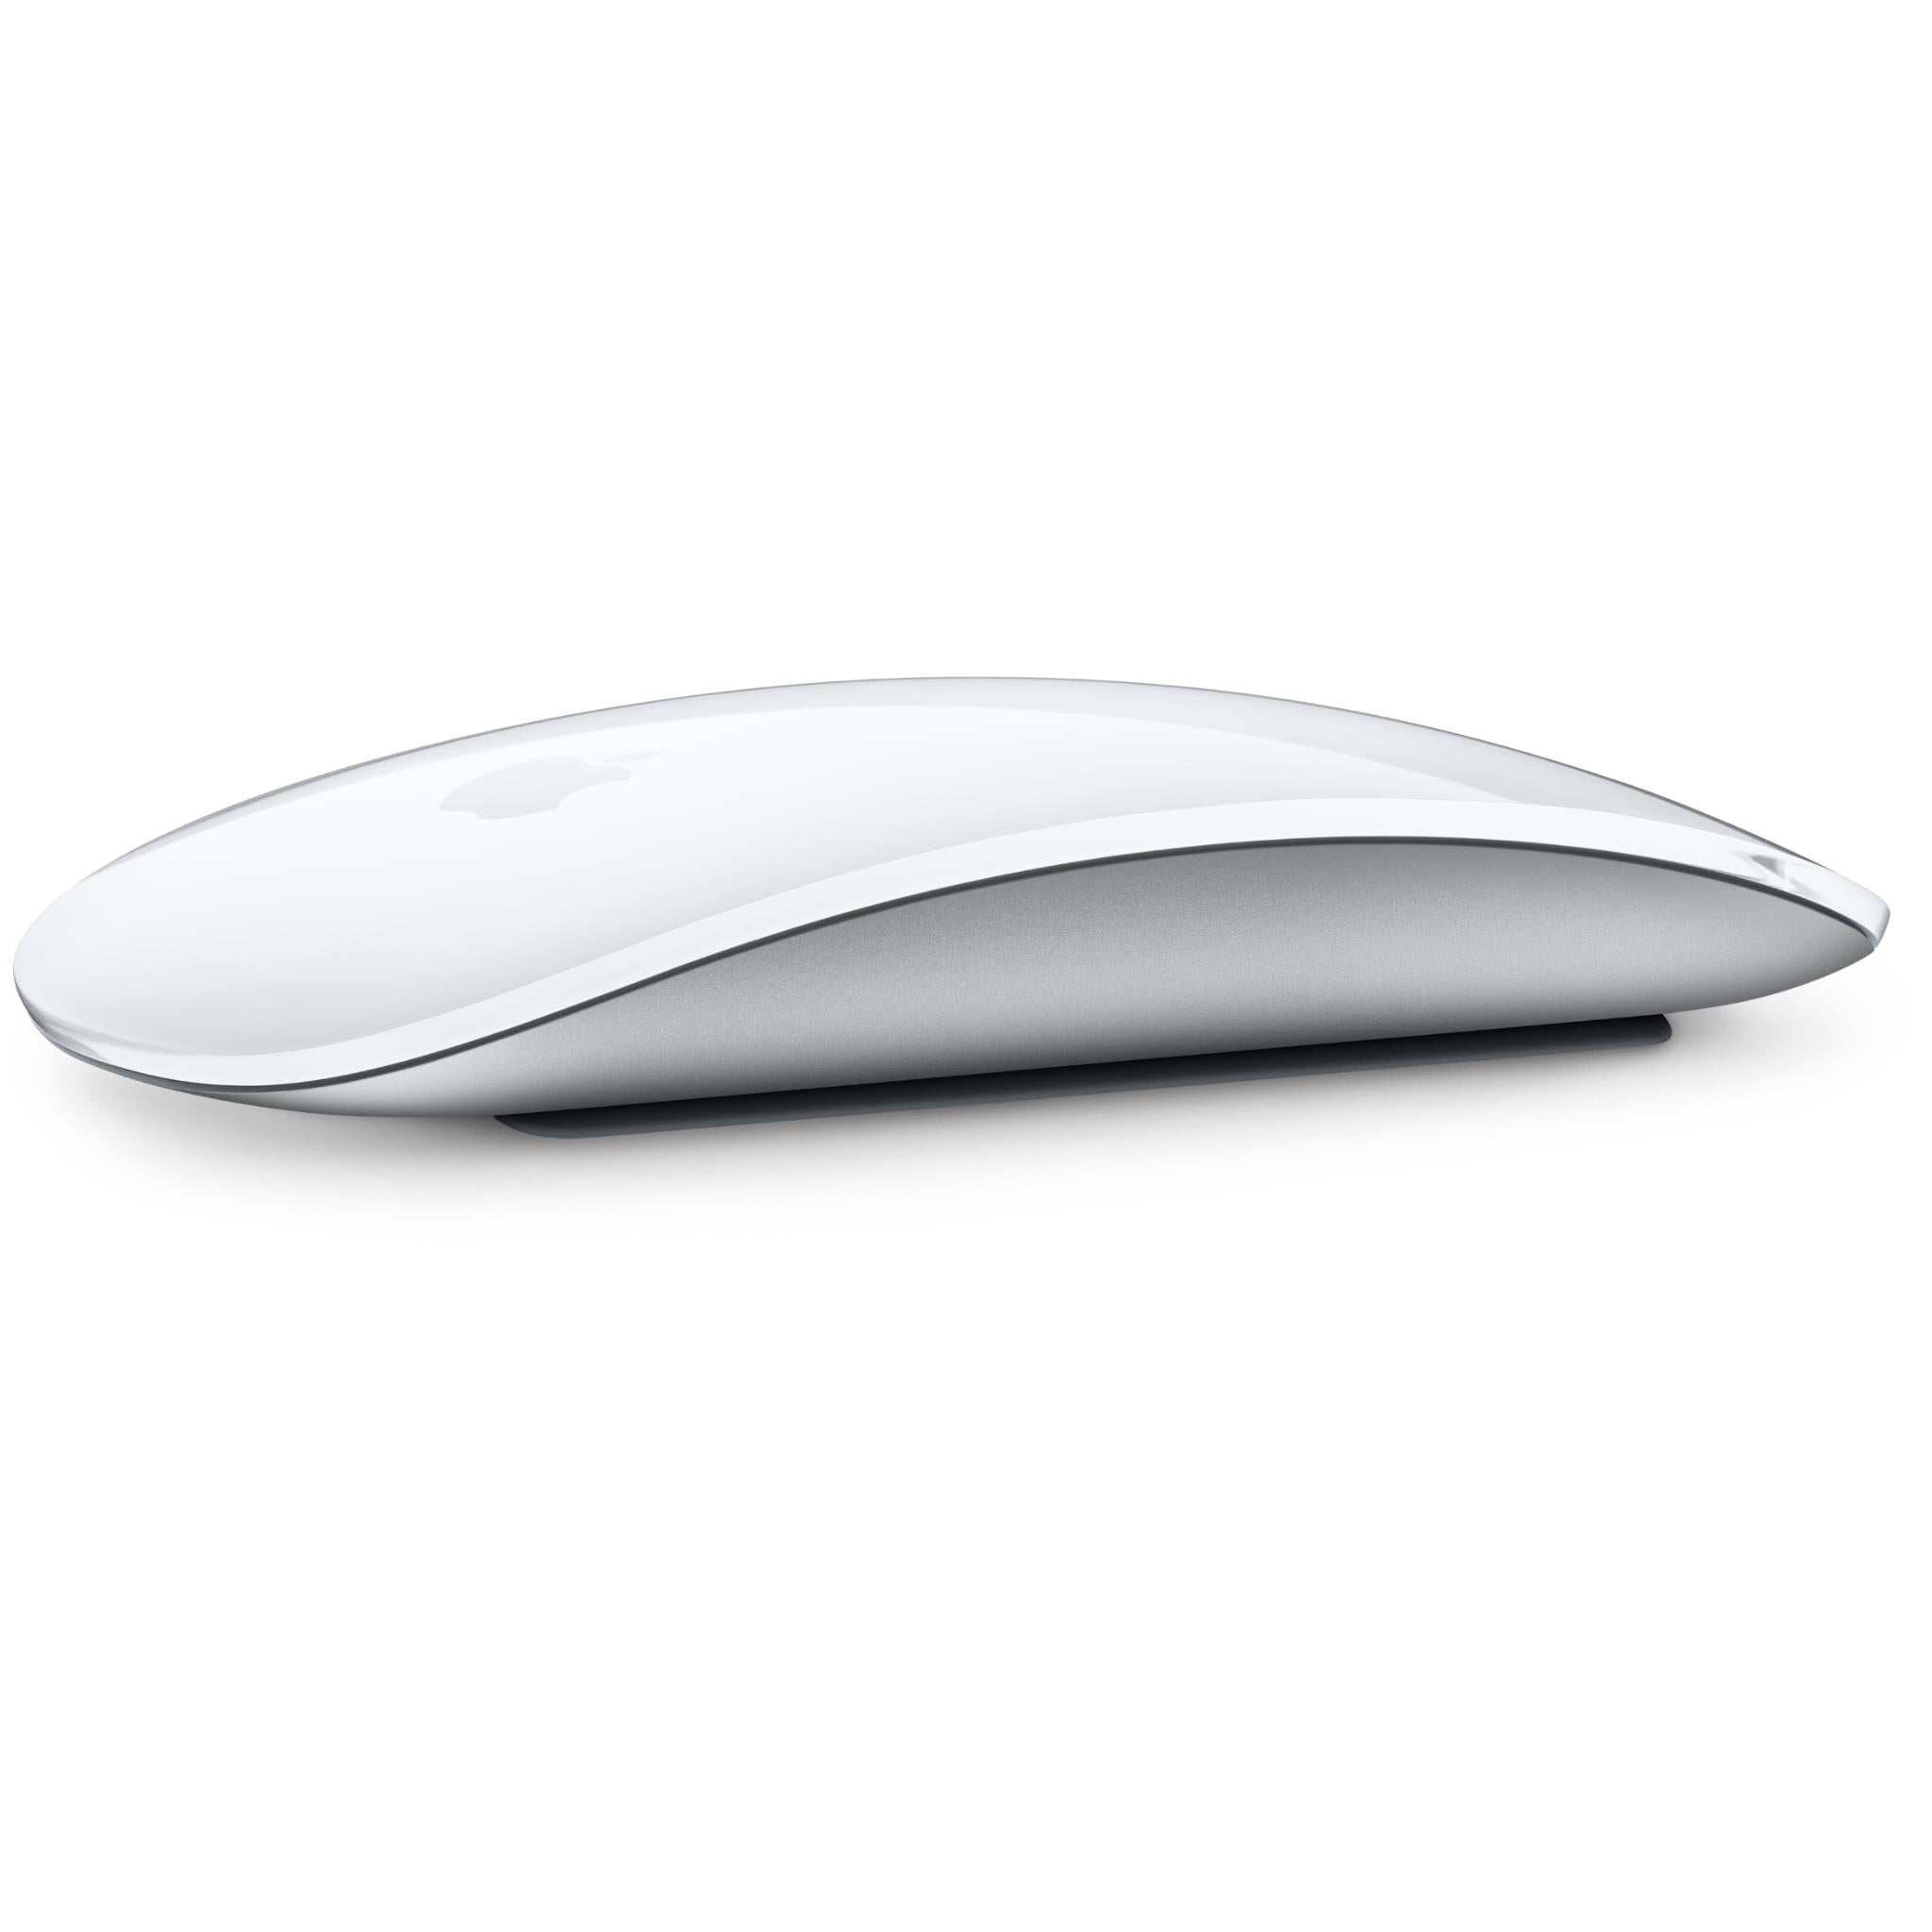 Apple Magic Mouse 2 Wireless - Where to Buy it at the Best Price in ...